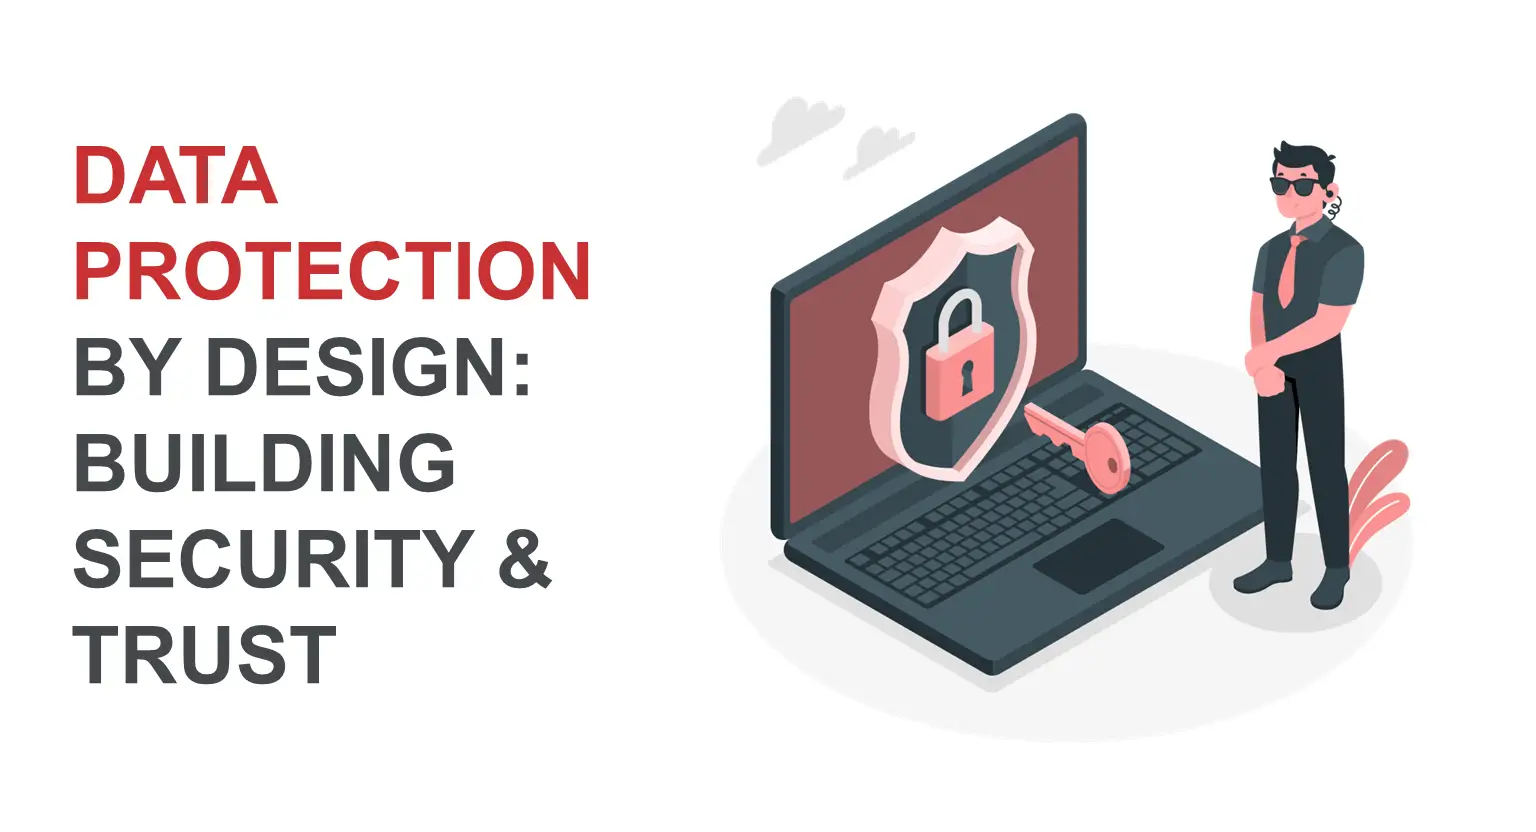 Data Protection by Design: Building Security and Trust